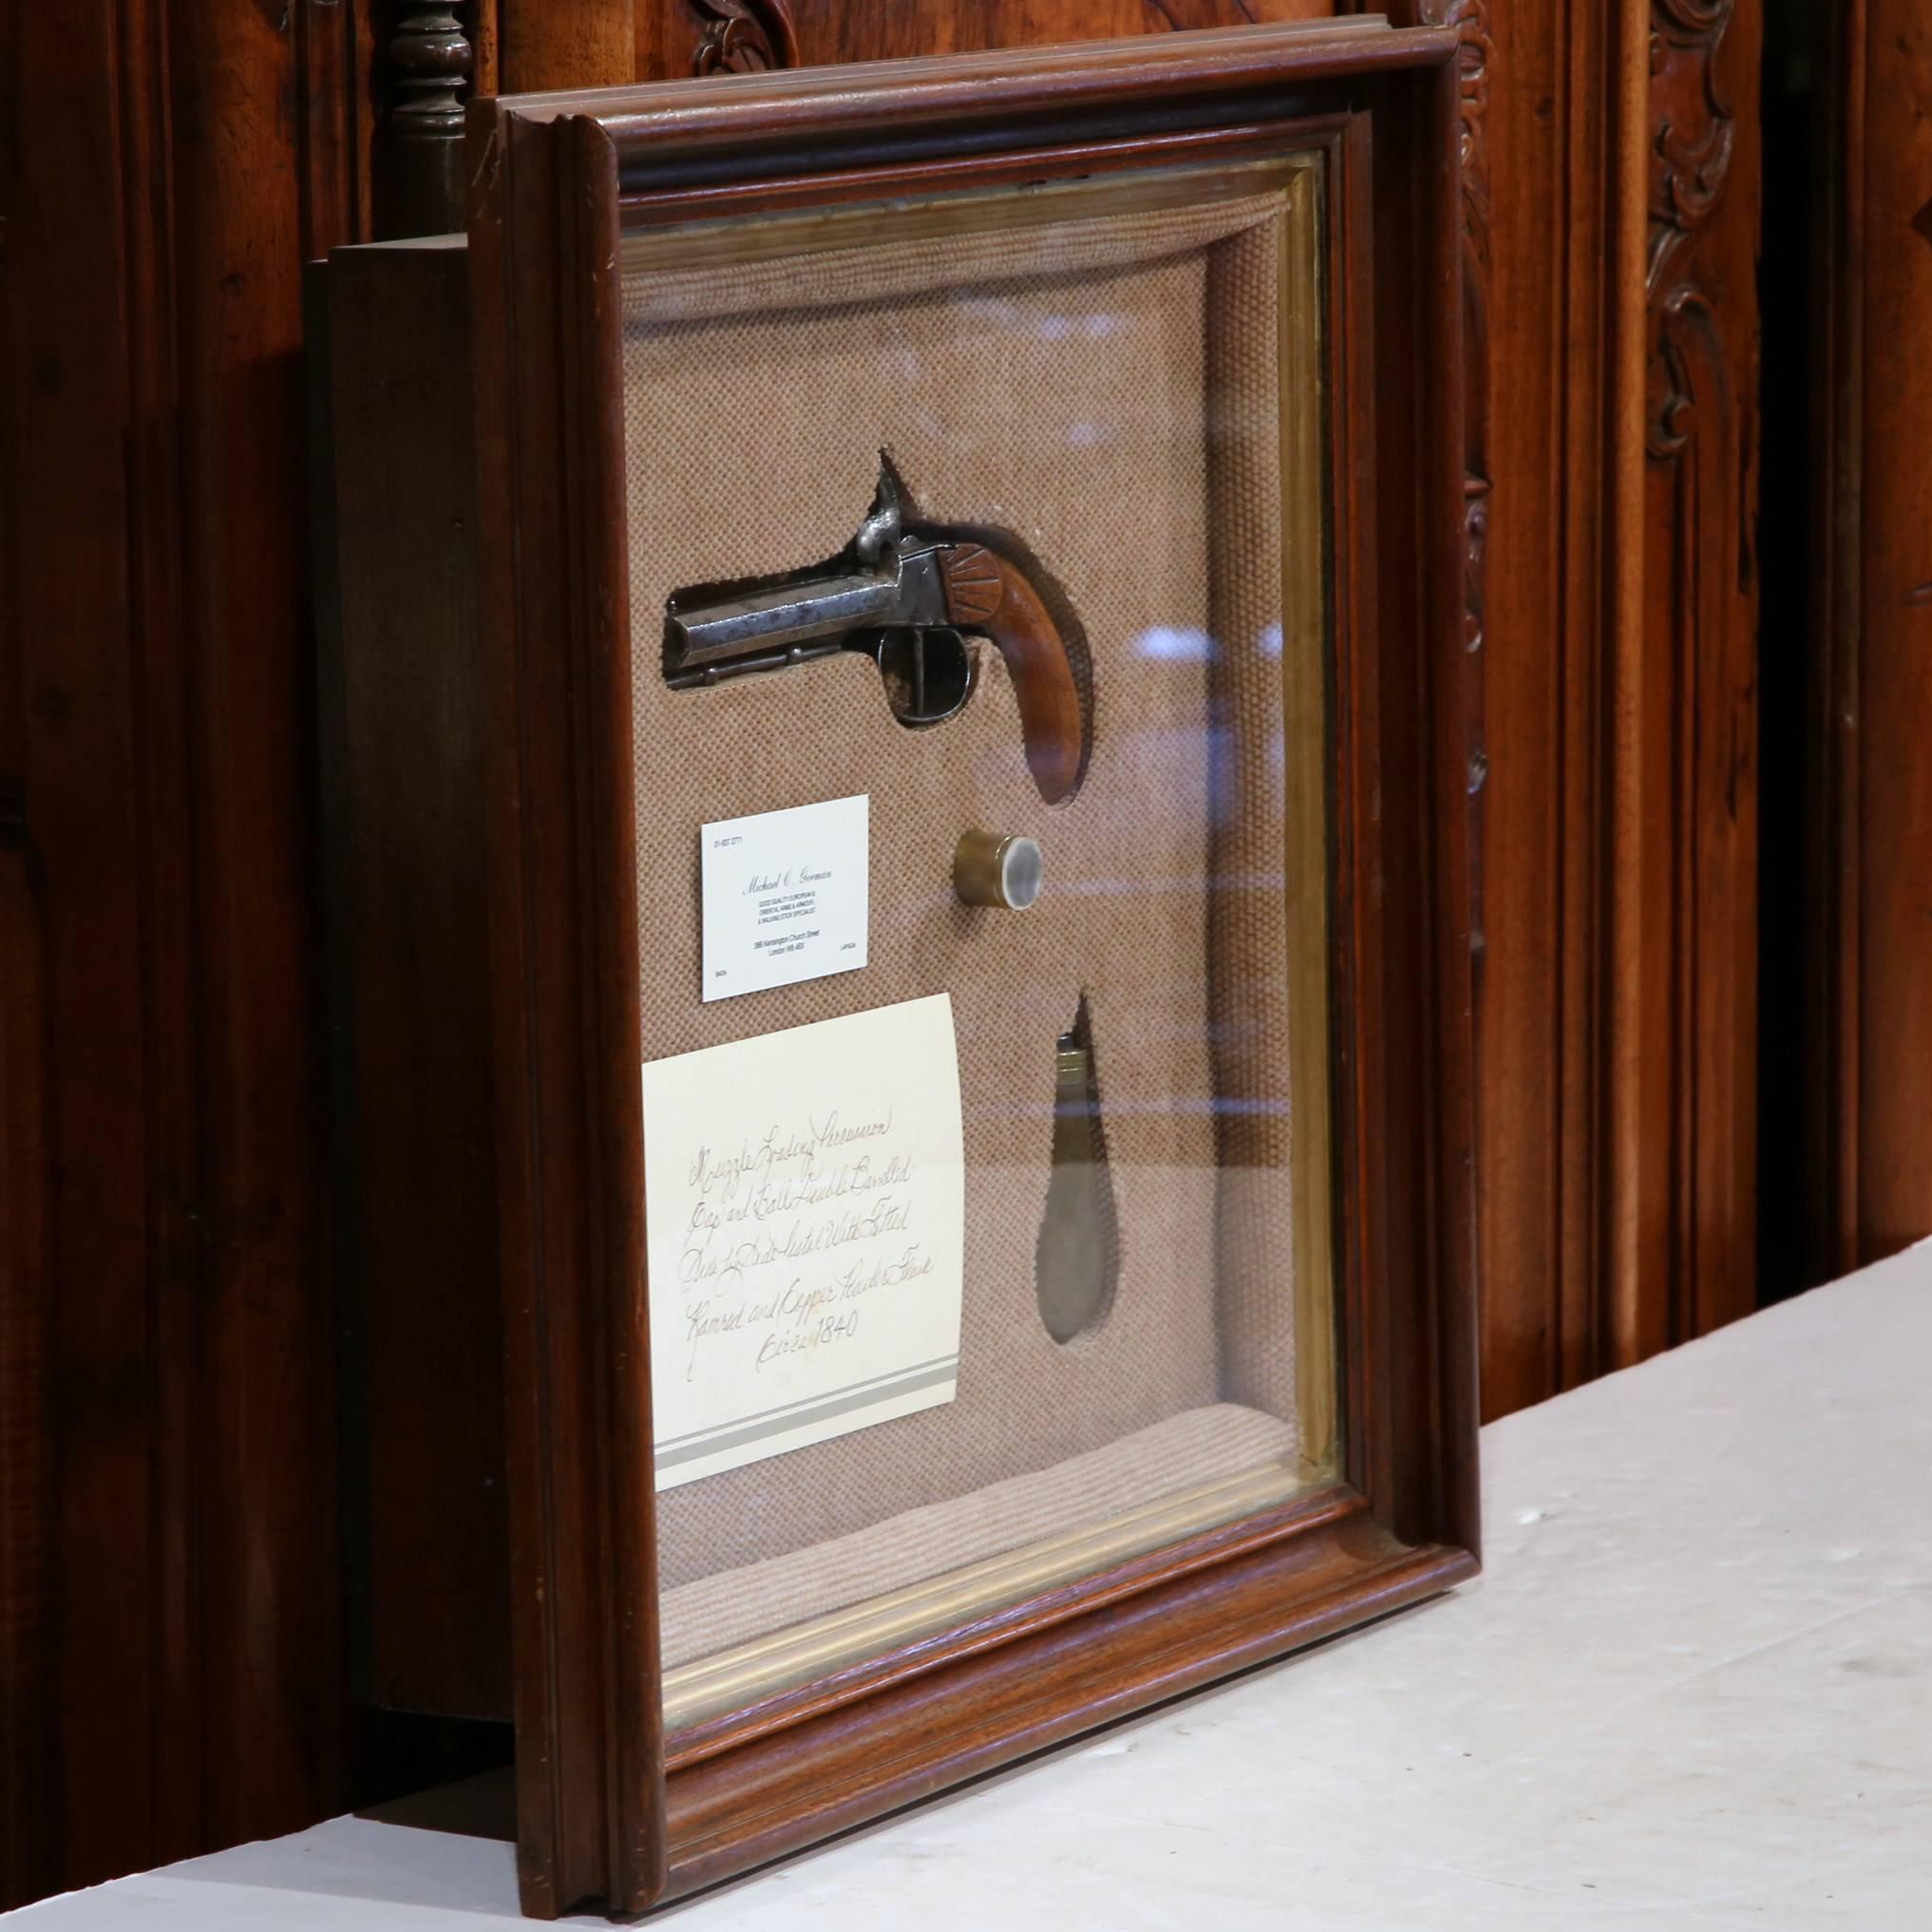 Place this framed vitrine with glass door in an office or game room. Crafted in England, circa 1840, the decorative antique piece features a one of a kind British antique muzzle loading percussion gap and ball double barreled side by side pistol,